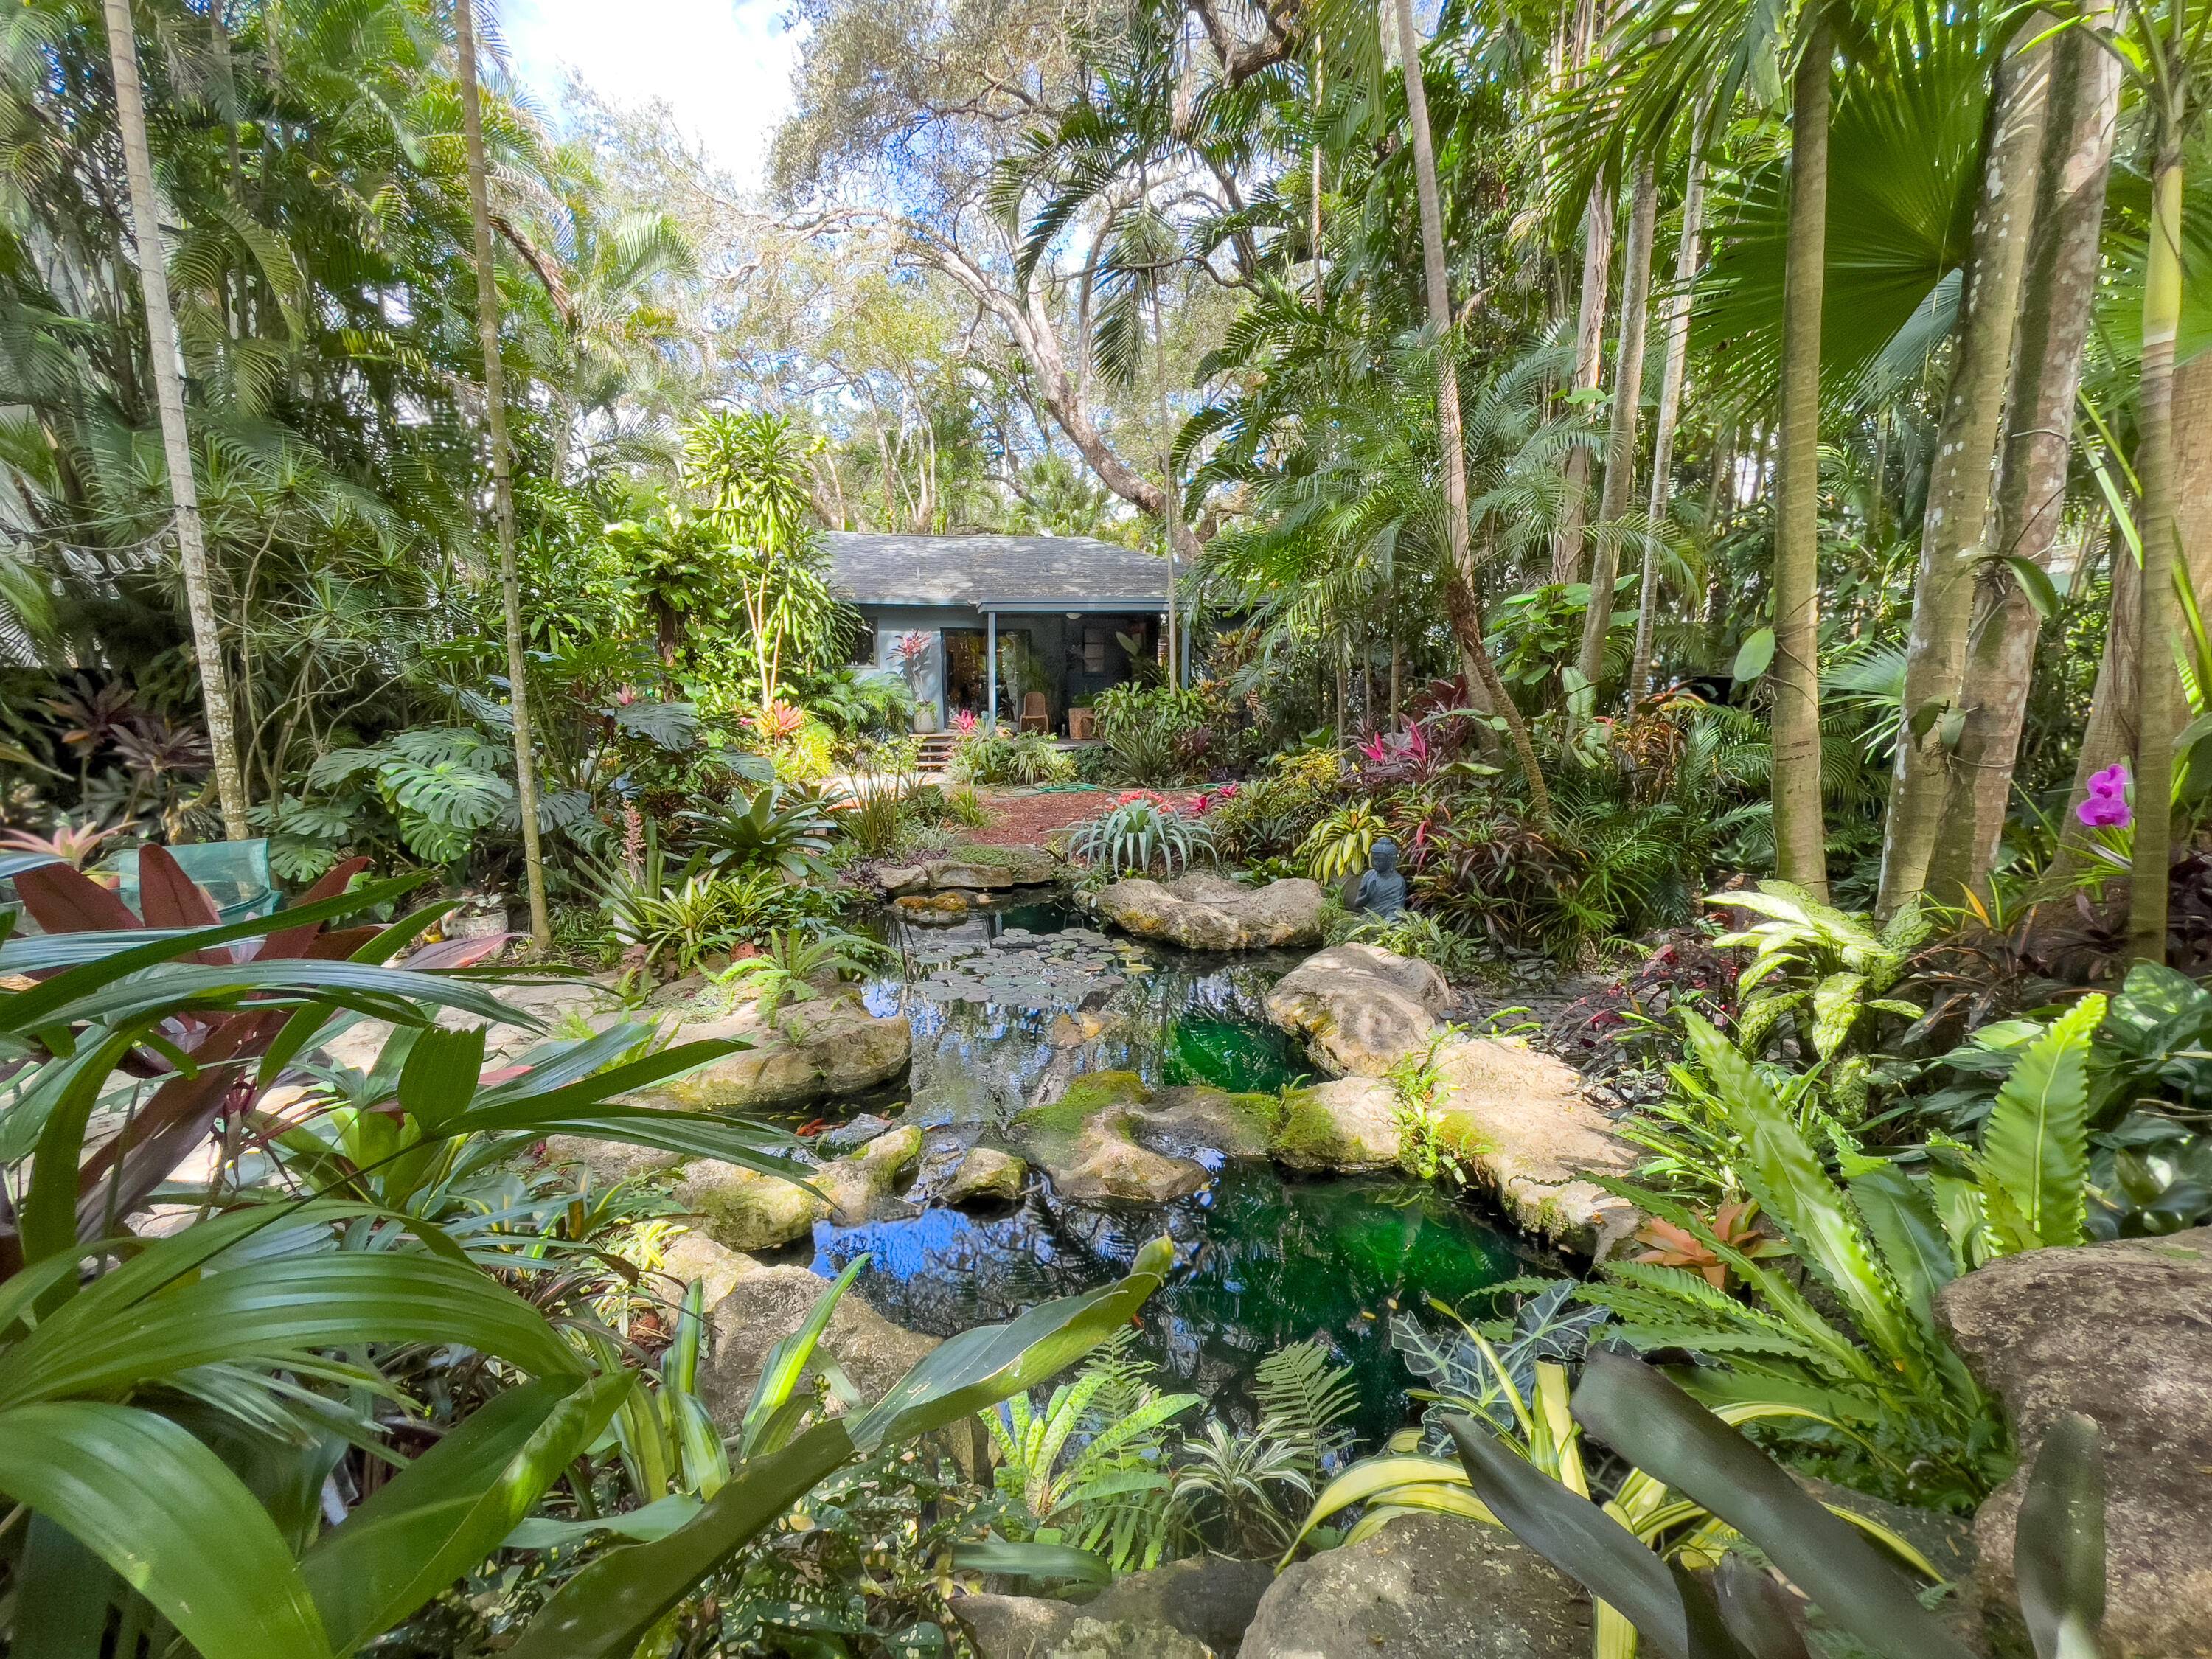 Imagine living within this exotic Coconut Grove wonderland, resplendent with dozens of towering palms, four majestic oaks, and bamboo.